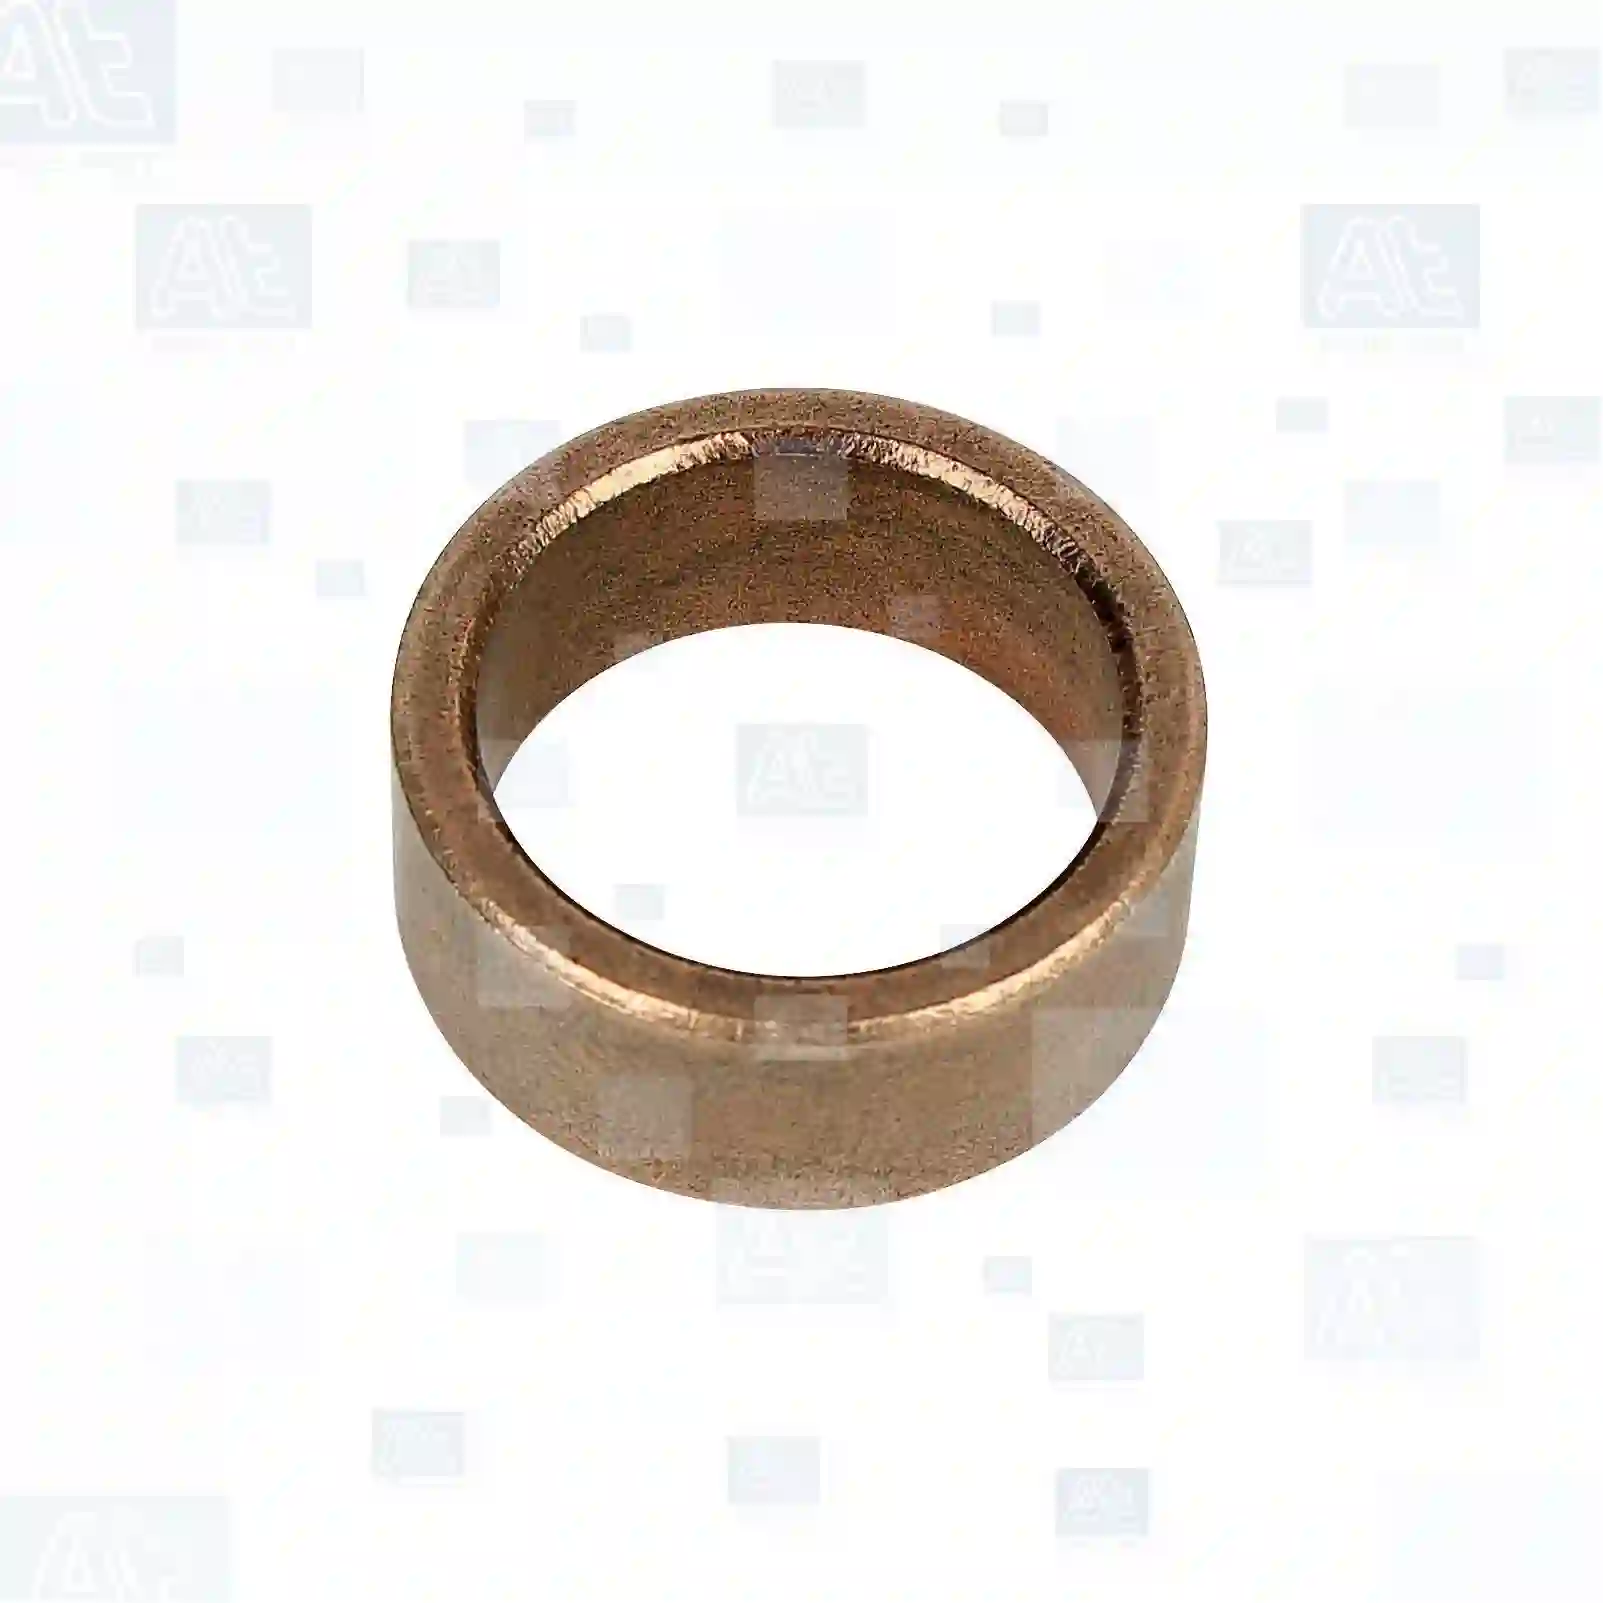 Starter bushing, at no 77710884, oem no: 2Y-2858, 0573340, 573340, 09920342, 79052278, 79850012, 82256320, 925833, 1334728C1, 79052278, 1289971, 09920342, 79052278, 79850012, 82256320, 610705208, 81930200428, 81976020201, 0001514150, 008001730010, E1528607, 0003580519, 7701007381, 7701007381, 192965, 7701007381, 551000301016, 614090726, 009920342, 061654762, 240481 At Spare Part | Engine, Accelerator Pedal, Camshaft, Connecting Rod, Crankcase, Crankshaft, Cylinder Head, Engine Suspension Mountings, Exhaust Manifold, Exhaust Gas Recirculation, Filter Kits, Flywheel Housing, General Overhaul Kits, Engine, Intake Manifold, Oil Cleaner, Oil Cooler, Oil Filter, Oil Pump, Oil Sump, Piston & Liner, Sensor & Switch, Timing Case, Turbocharger, Cooling System, Belt Tensioner, Coolant Filter, Coolant Pipe, Corrosion Prevention Agent, Drive, Expansion Tank, Fan, Intercooler, Monitors & Gauges, Radiator, Thermostat, V-Belt / Timing belt, Water Pump, Fuel System, Electronical Injector Unit, Feed Pump, Fuel Filter, cpl., Fuel Gauge Sender,  Fuel Line, Fuel Pump, Fuel Tank, Injection Line Kit, Injection Pump, Exhaust System, Clutch & Pedal, Gearbox, Propeller Shaft, Axles, Brake System, Hubs & Wheels, Suspension, Leaf Spring, Universal Parts / Accessories, Steering, Electrical System, Cabin Starter bushing, at no 77710884, oem no: 2Y-2858, 0573340, 573340, 09920342, 79052278, 79850012, 82256320, 925833, 1334728C1, 79052278, 1289971, 09920342, 79052278, 79850012, 82256320, 610705208, 81930200428, 81976020201, 0001514150, 008001730010, E1528607, 0003580519, 7701007381, 7701007381, 192965, 7701007381, 551000301016, 614090726, 009920342, 061654762, 240481 At Spare Part | Engine, Accelerator Pedal, Camshaft, Connecting Rod, Crankcase, Crankshaft, Cylinder Head, Engine Suspension Mountings, Exhaust Manifold, Exhaust Gas Recirculation, Filter Kits, Flywheel Housing, General Overhaul Kits, Engine, Intake Manifold, Oil Cleaner, Oil Cooler, Oil Filter, Oil Pump, Oil Sump, Piston & Liner, Sensor & Switch, Timing Case, Turbocharger, Cooling System, Belt Tensioner, Coolant Filter, Coolant Pipe, Corrosion Prevention Agent, Drive, Expansion Tank, Fan, Intercooler, Monitors & Gauges, Radiator, Thermostat, V-Belt / Timing belt, Water Pump, Fuel System, Electronical Injector Unit, Feed Pump, Fuel Filter, cpl., Fuel Gauge Sender,  Fuel Line, Fuel Pump, Fuel Tank, Injection Line Kit, Injection Pump, Exhaust System, Clutch & Pedal, Gearbox, Propeller Shaft, Axles, Brake System, Hubs & Wheels, Suspension, Leaf Spring, Universal Parts / Accessories, Steering, Electrical System, Cabin